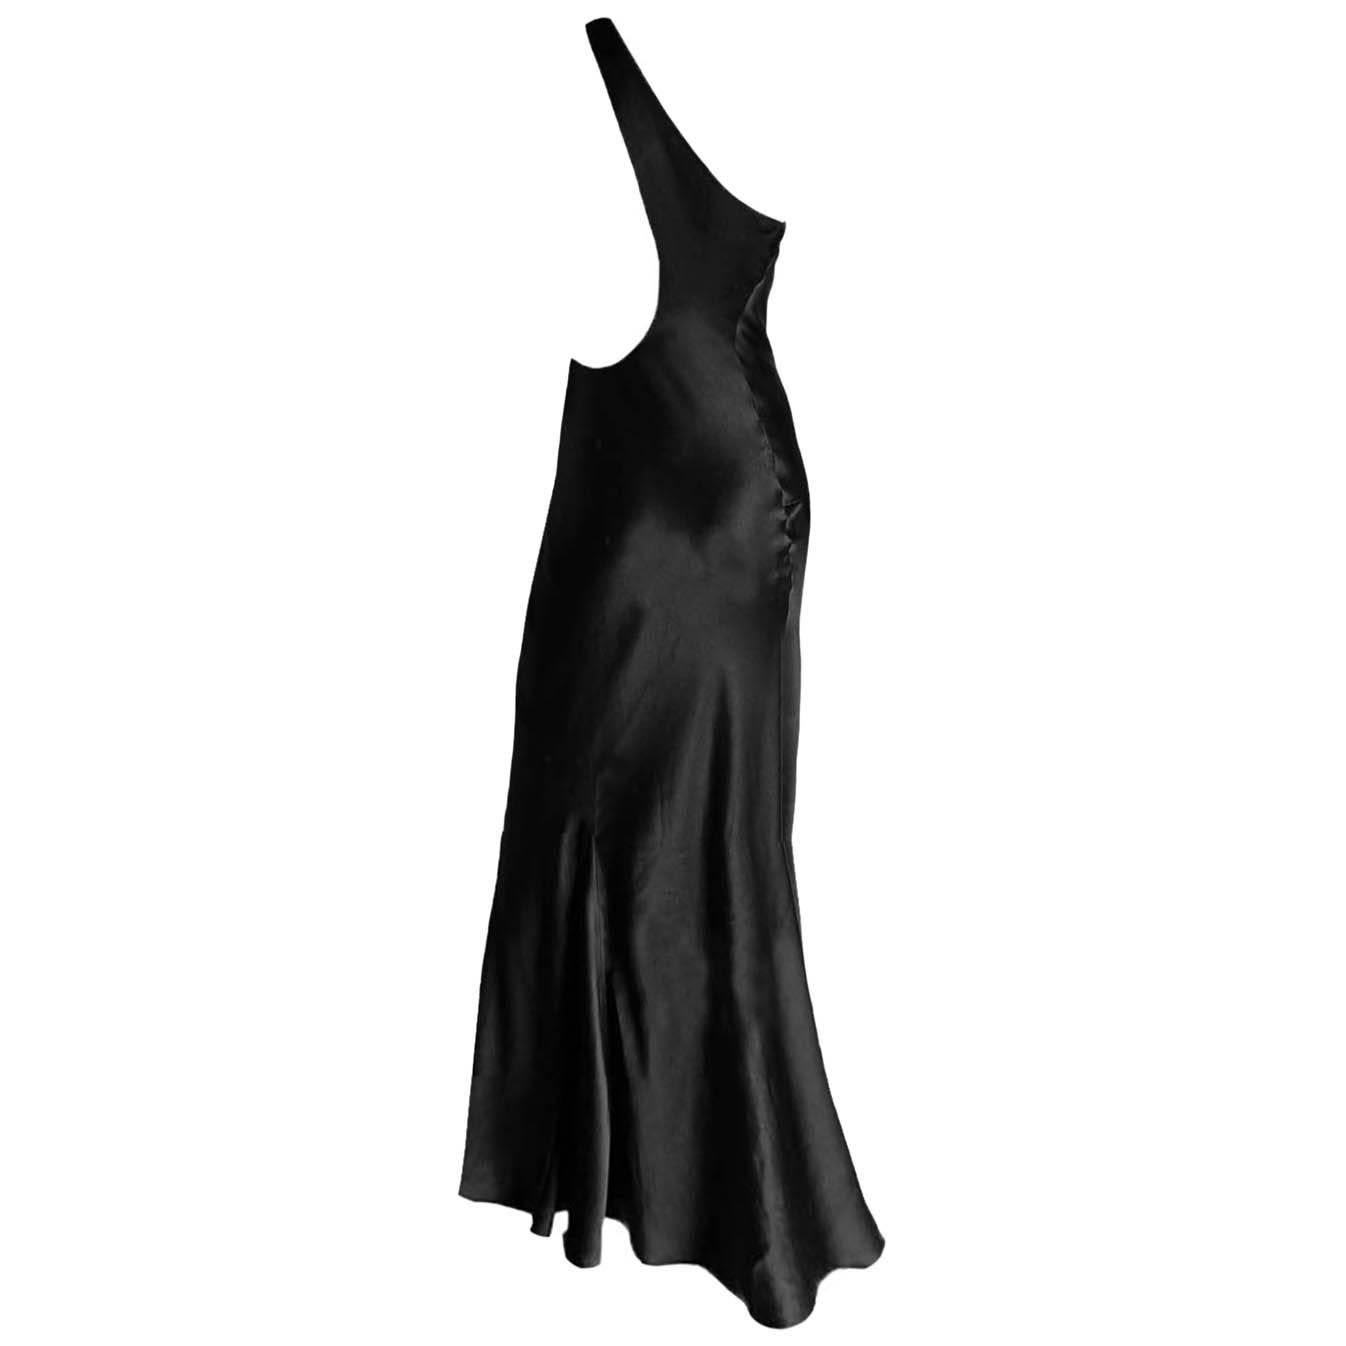 Uber Rare & Incredibly Chic Tom Ford For Gucci Spring Summer 2000 Black Silk Minimalist Backless Runway Gown!

Who could ever forget Tom Ford's spring summer 2000 collection for Gucci? This extraordinary gown, surely one of the most memorable